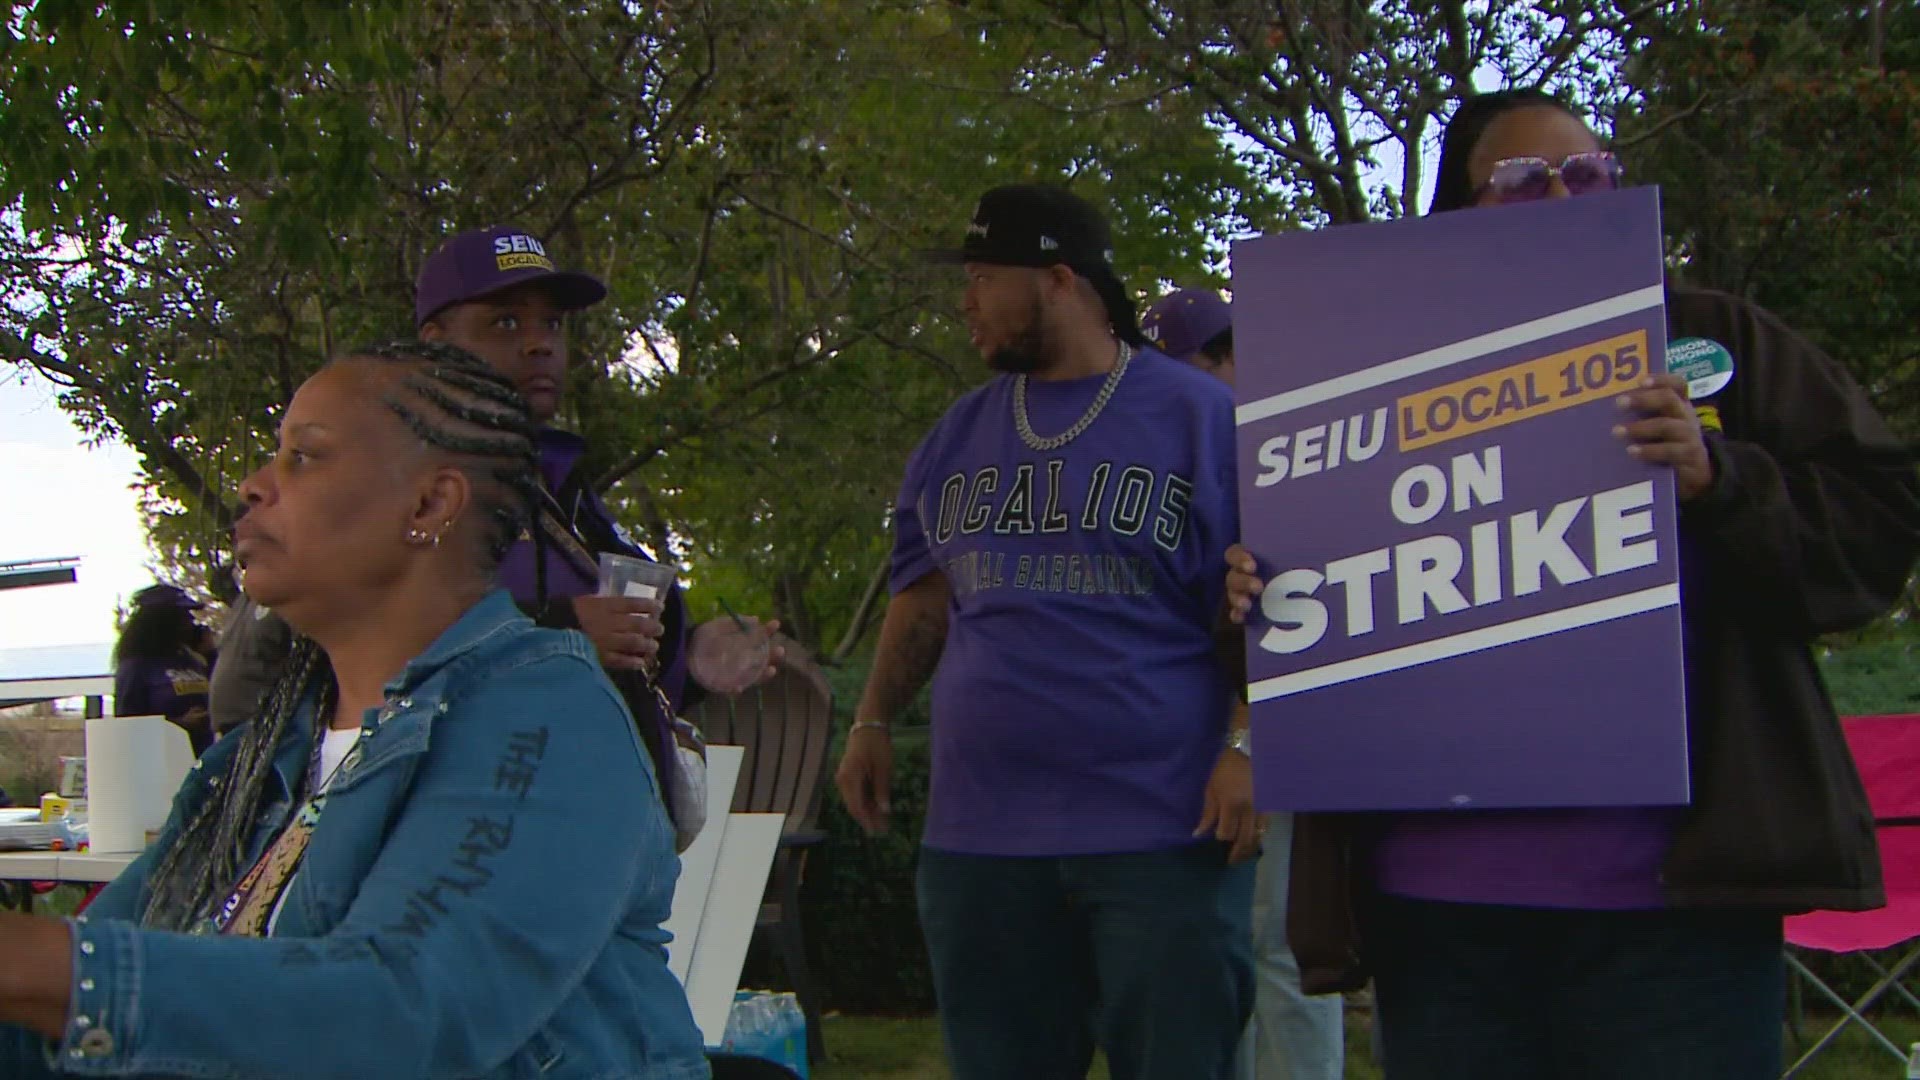 Unable to reach a deal on a new contract, Kaiser workers are picketing as part of a strike calling for better staffing, improved patient care and higher wages.